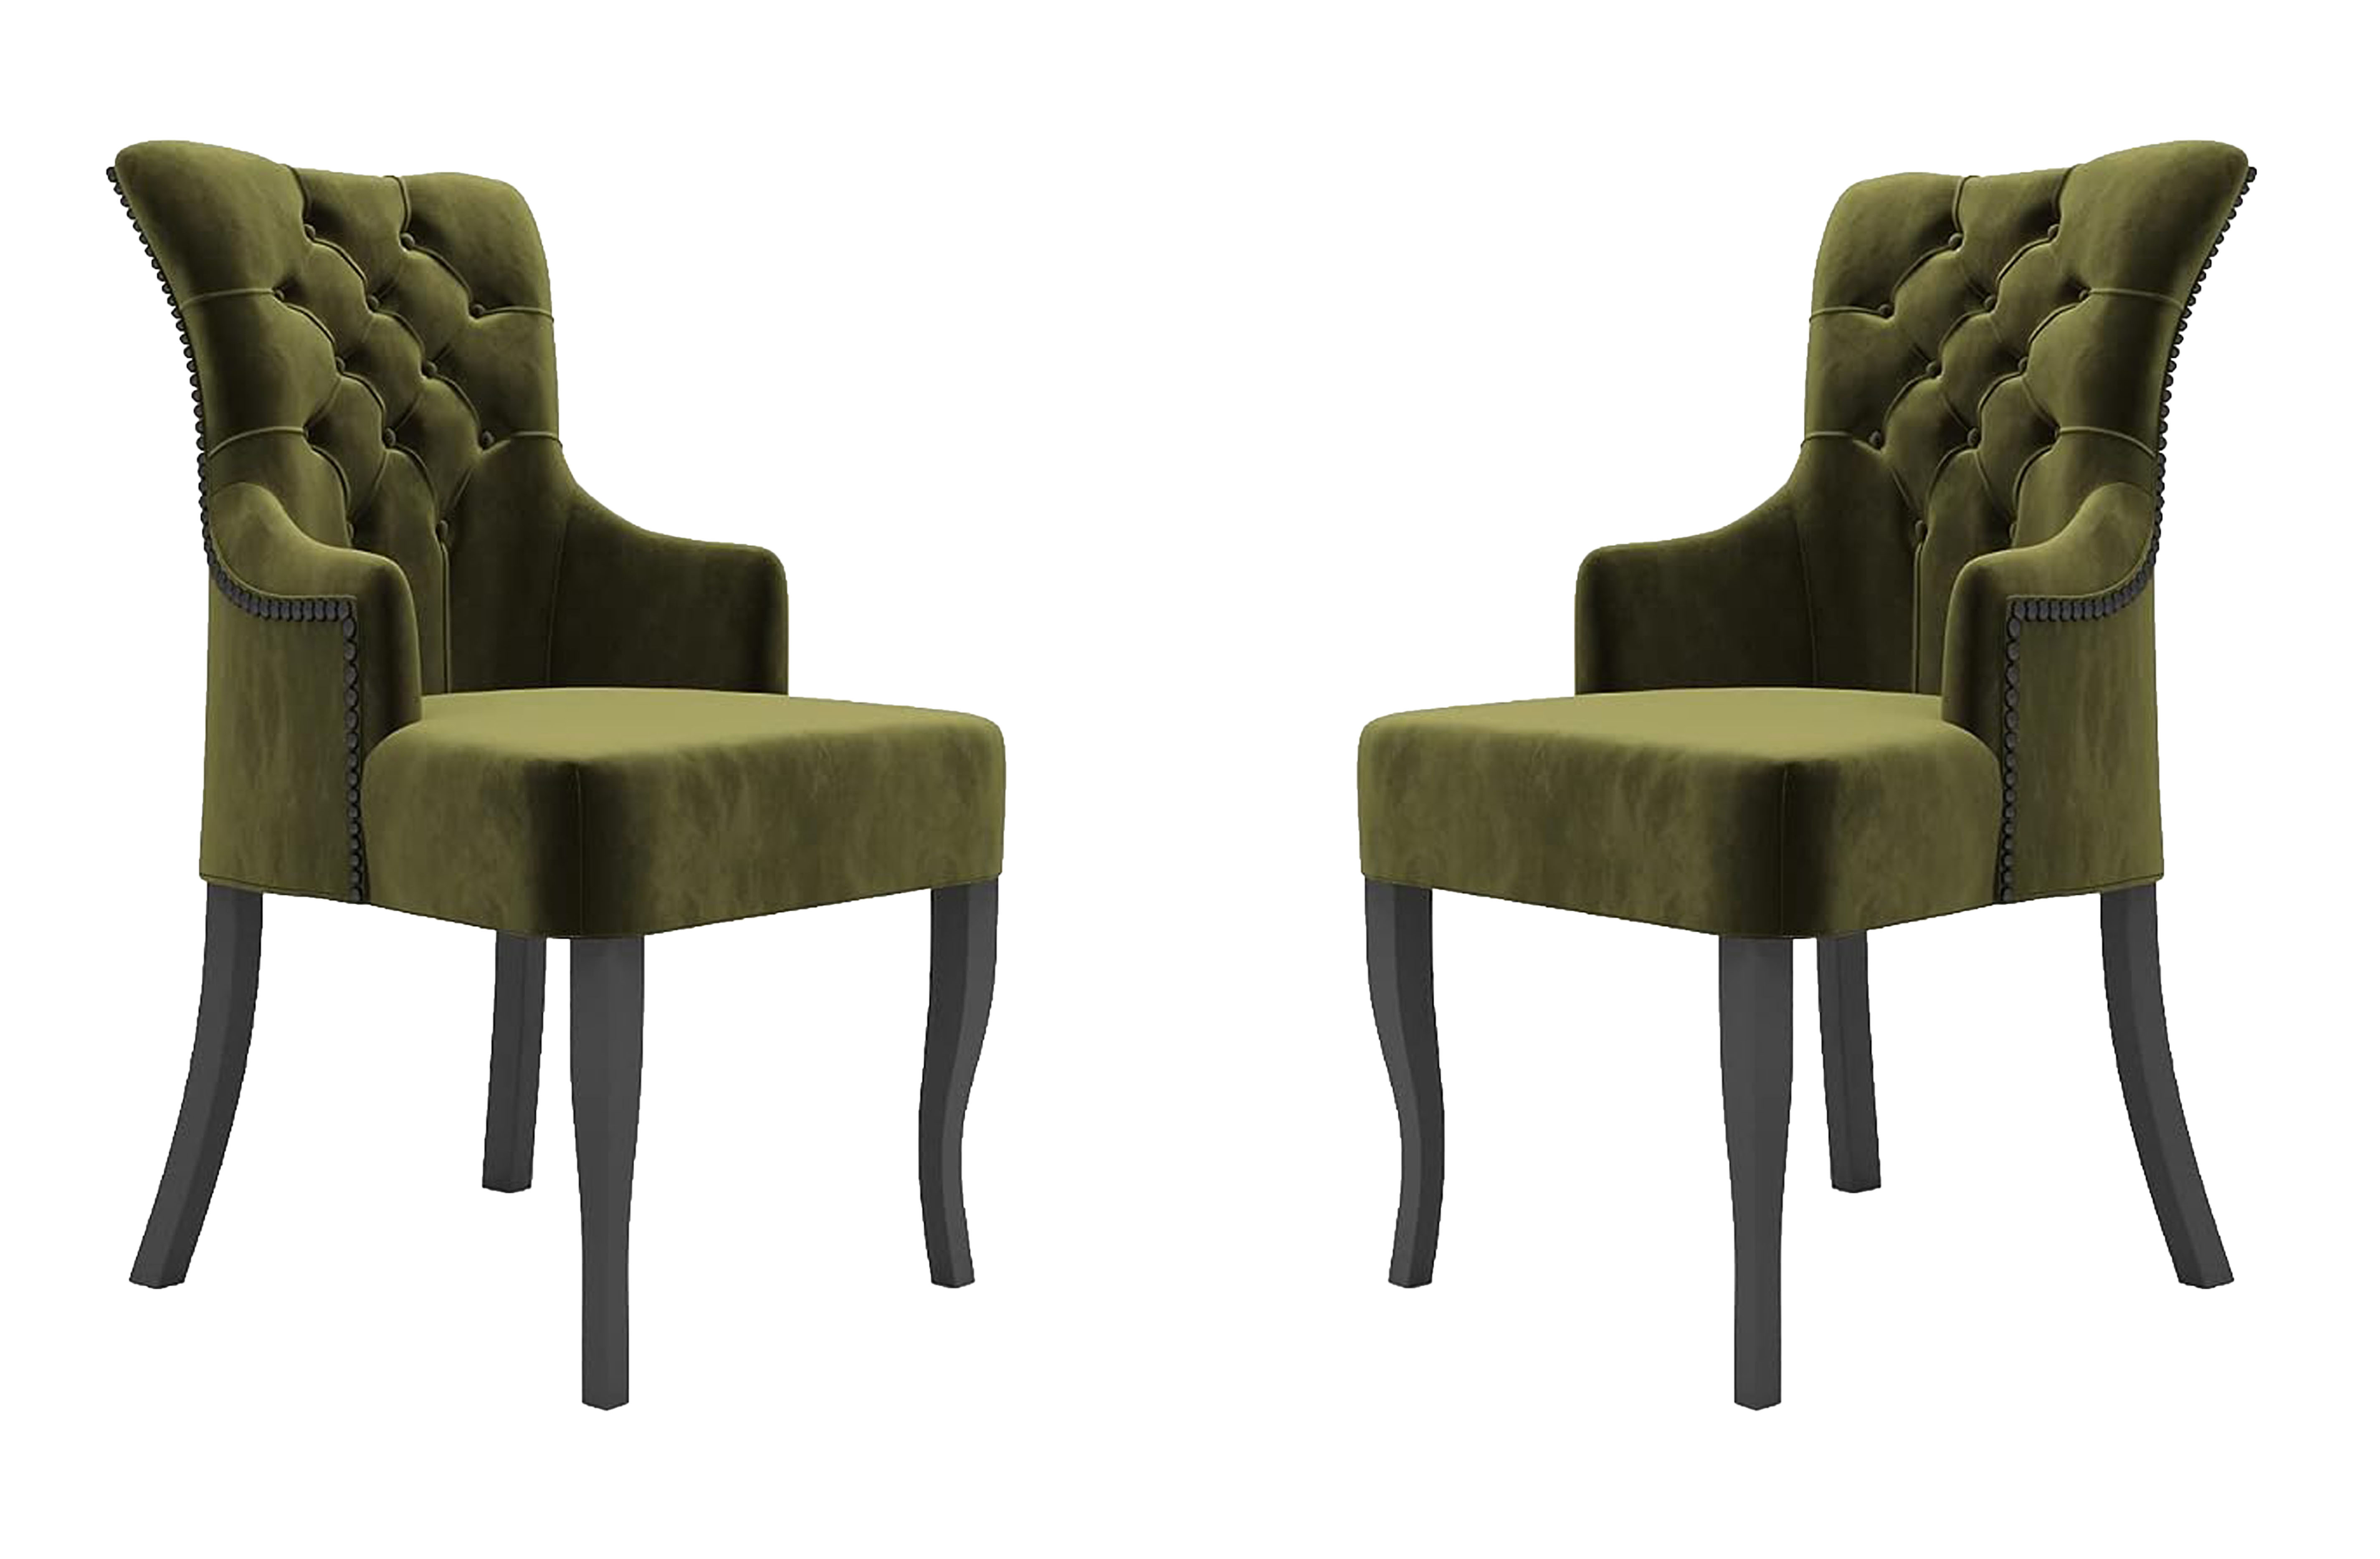 Dynamo green dining chair (set of 2)